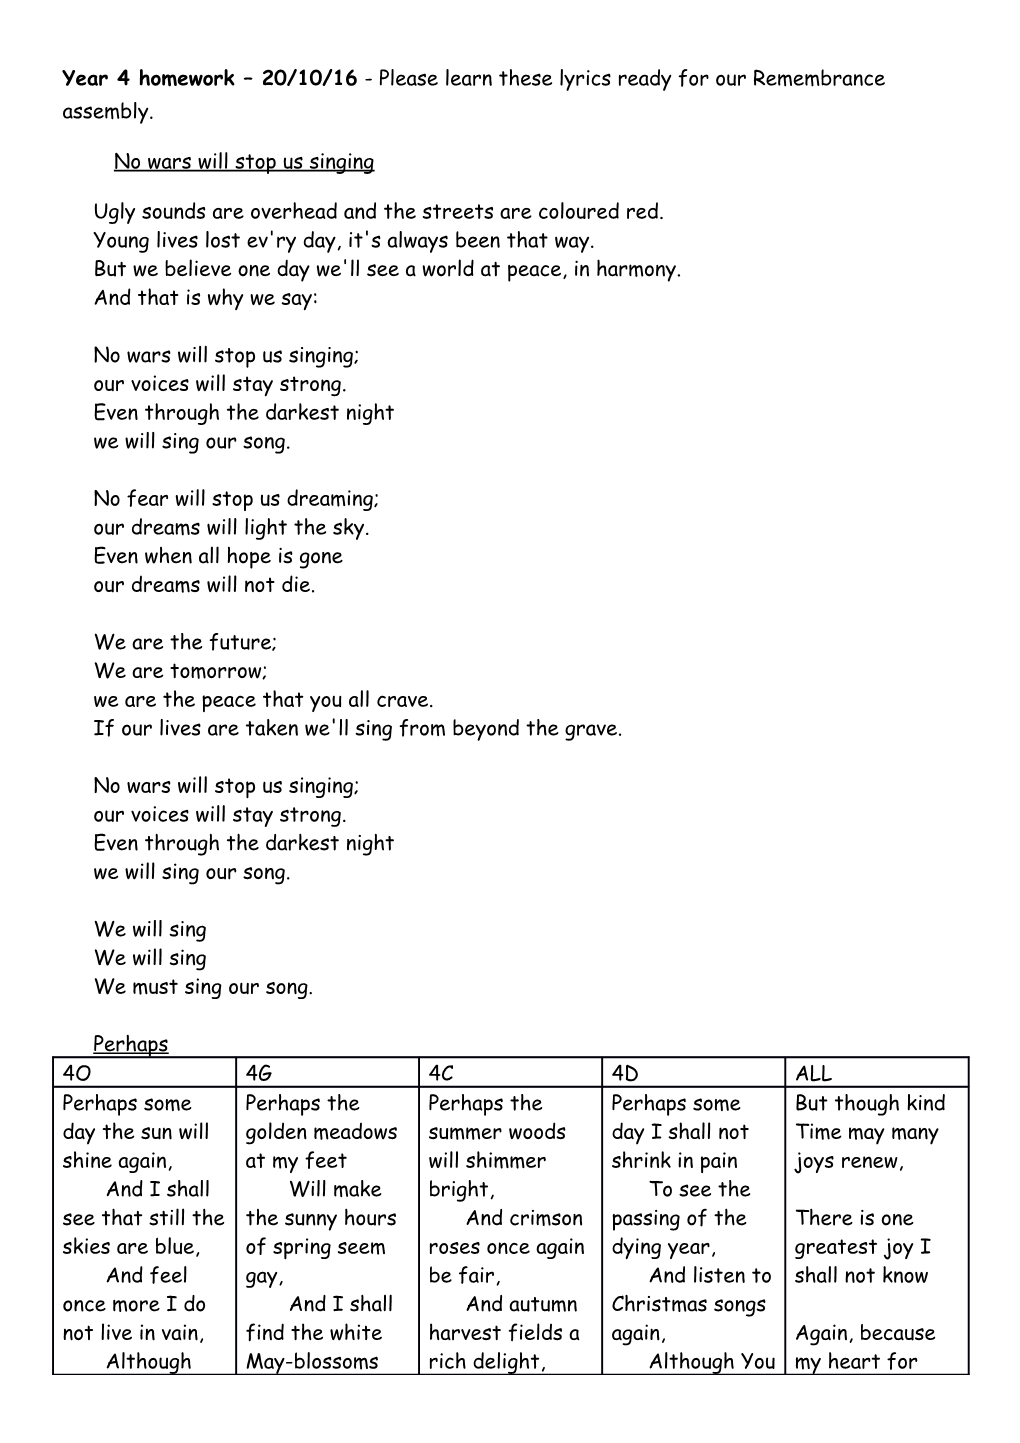 Year 4 Homework 20/10/16 - Please Learn These Lyrics Ready for Our Remembrance Assembly